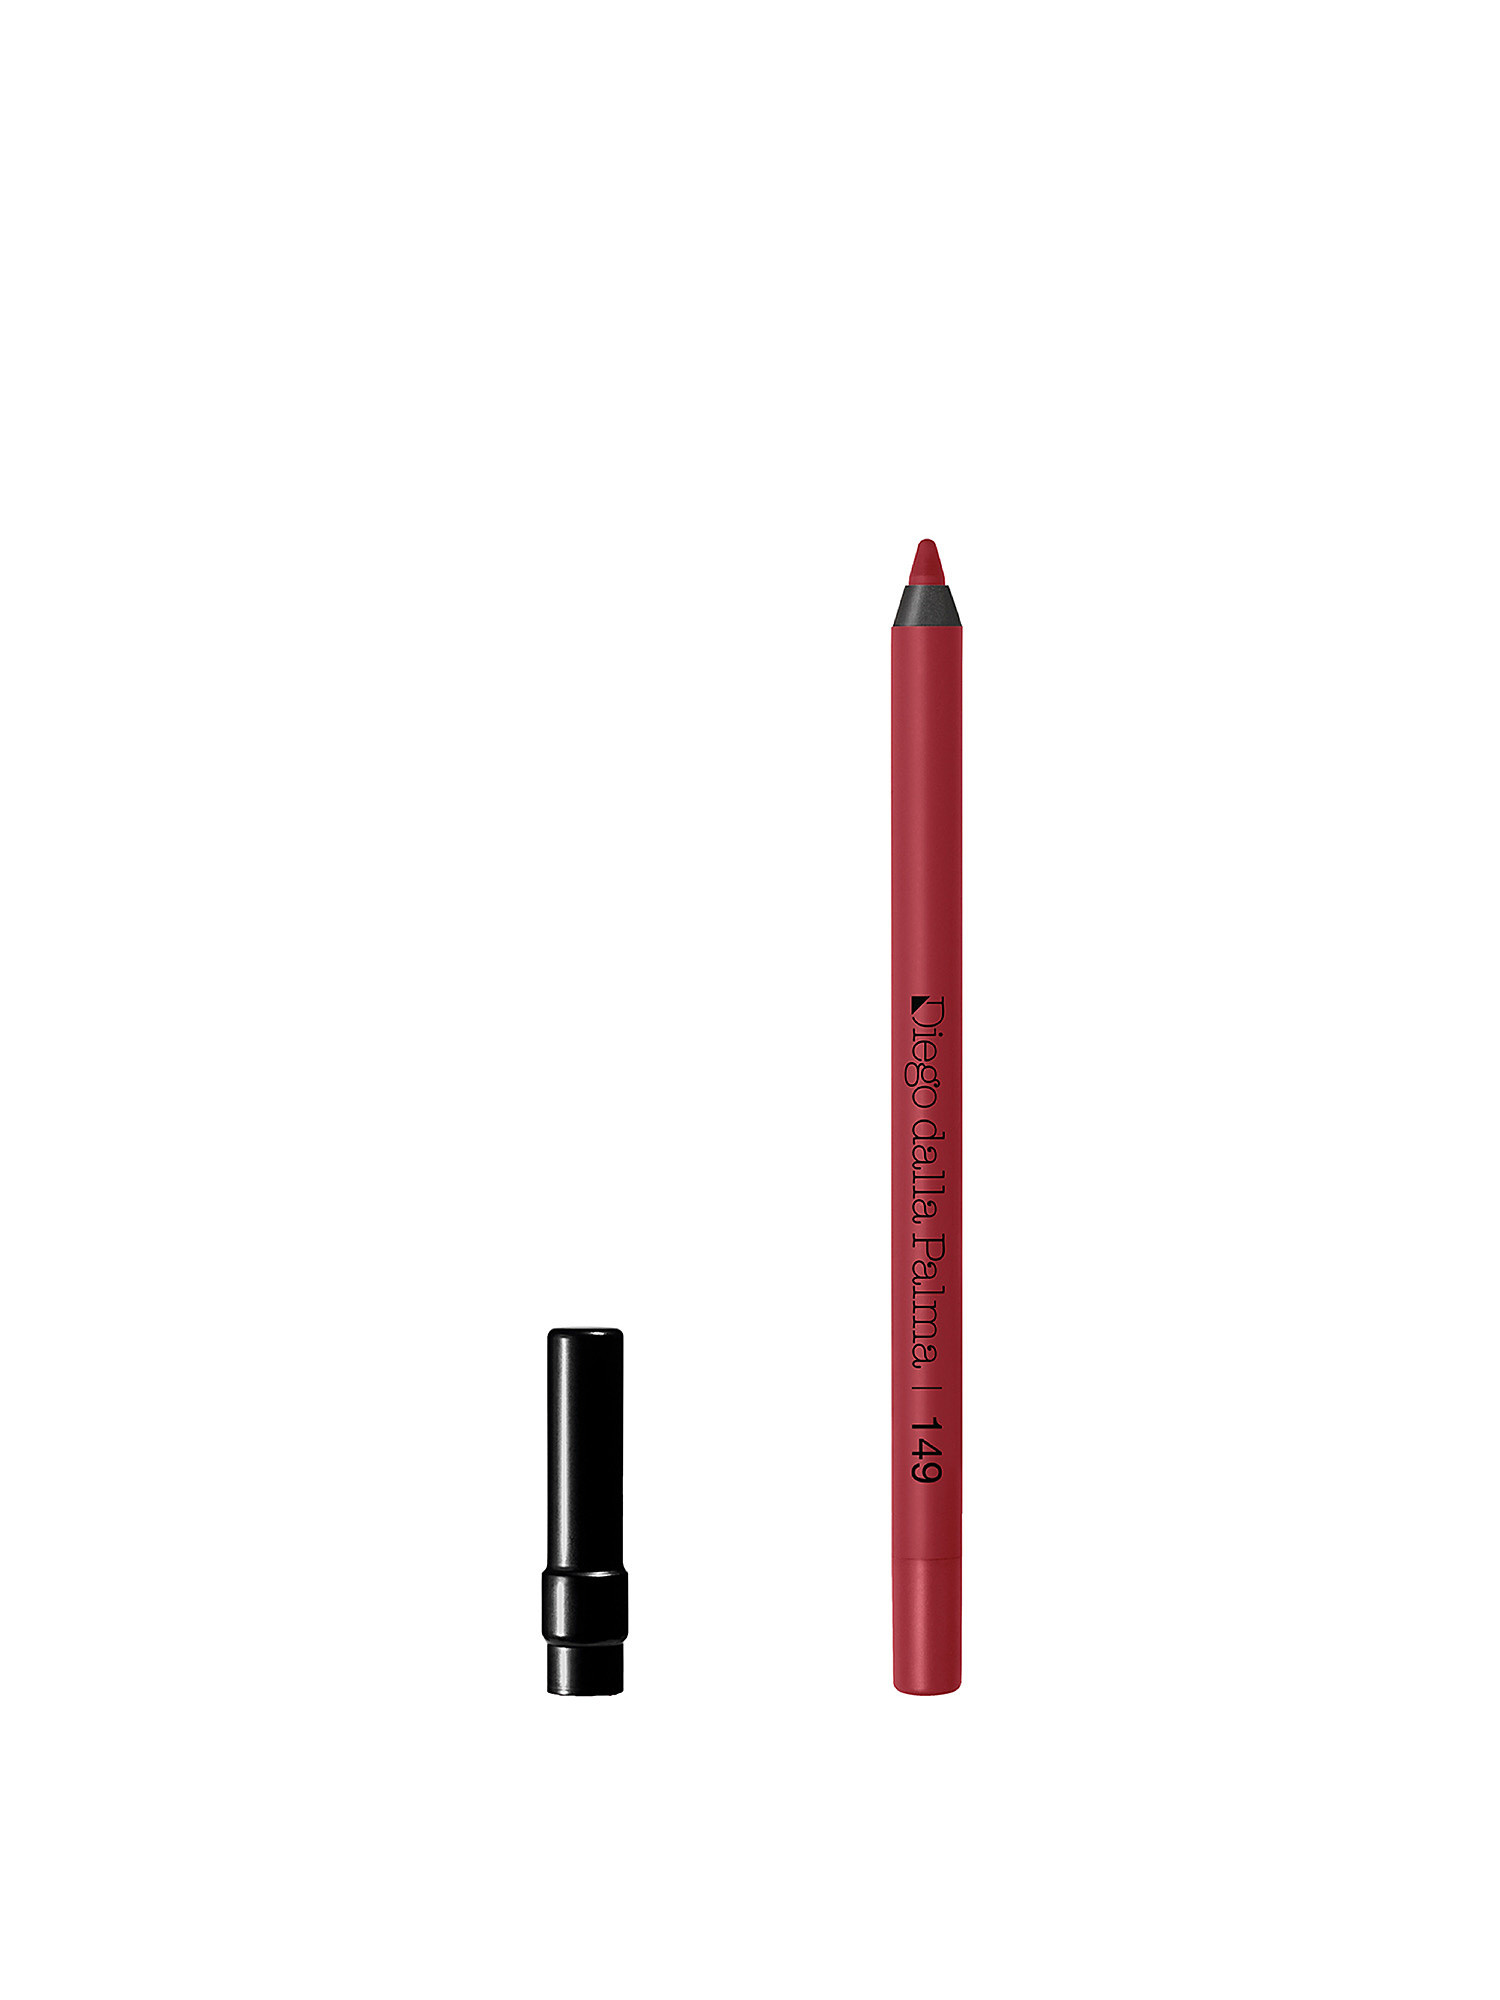 STAY ON ME Lip Liner Long Lasting Water resistant - 149, Brick Red, large image number 0